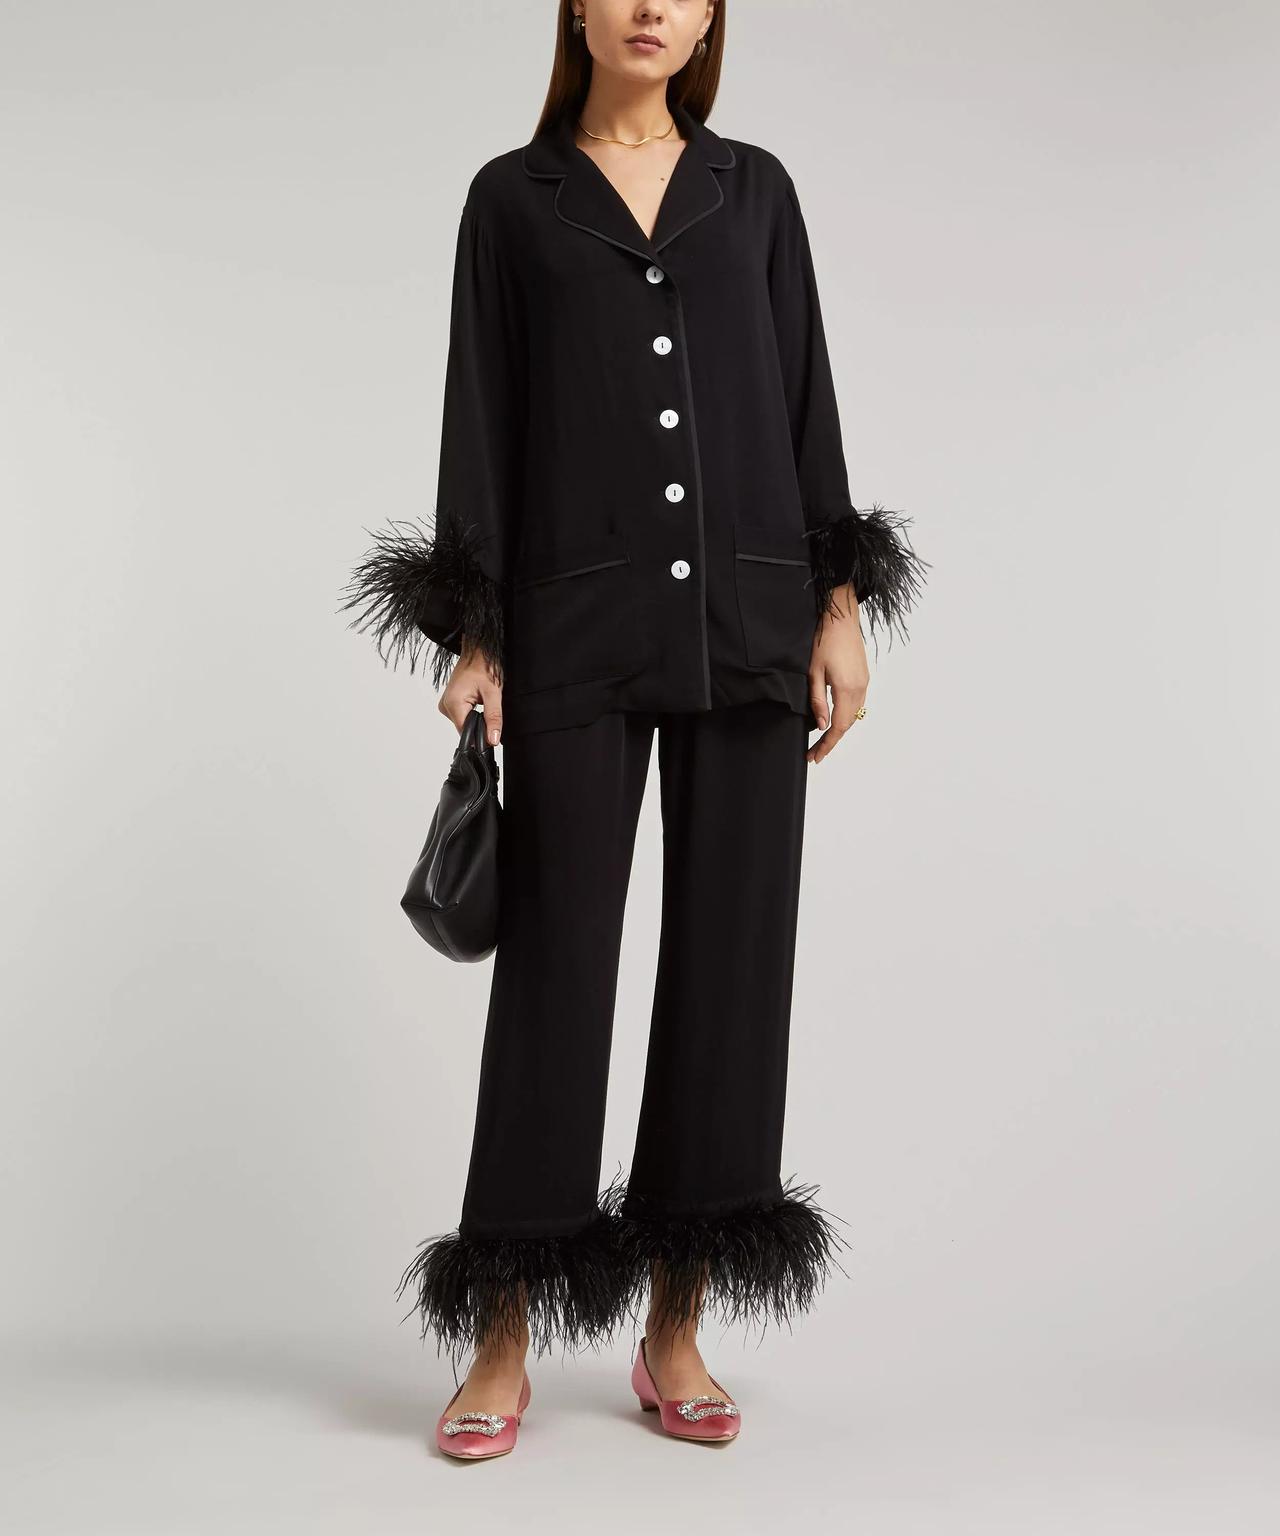 A model wearing a pair of silky black pyjamas trimmed at the wrists and ankles with black feathers